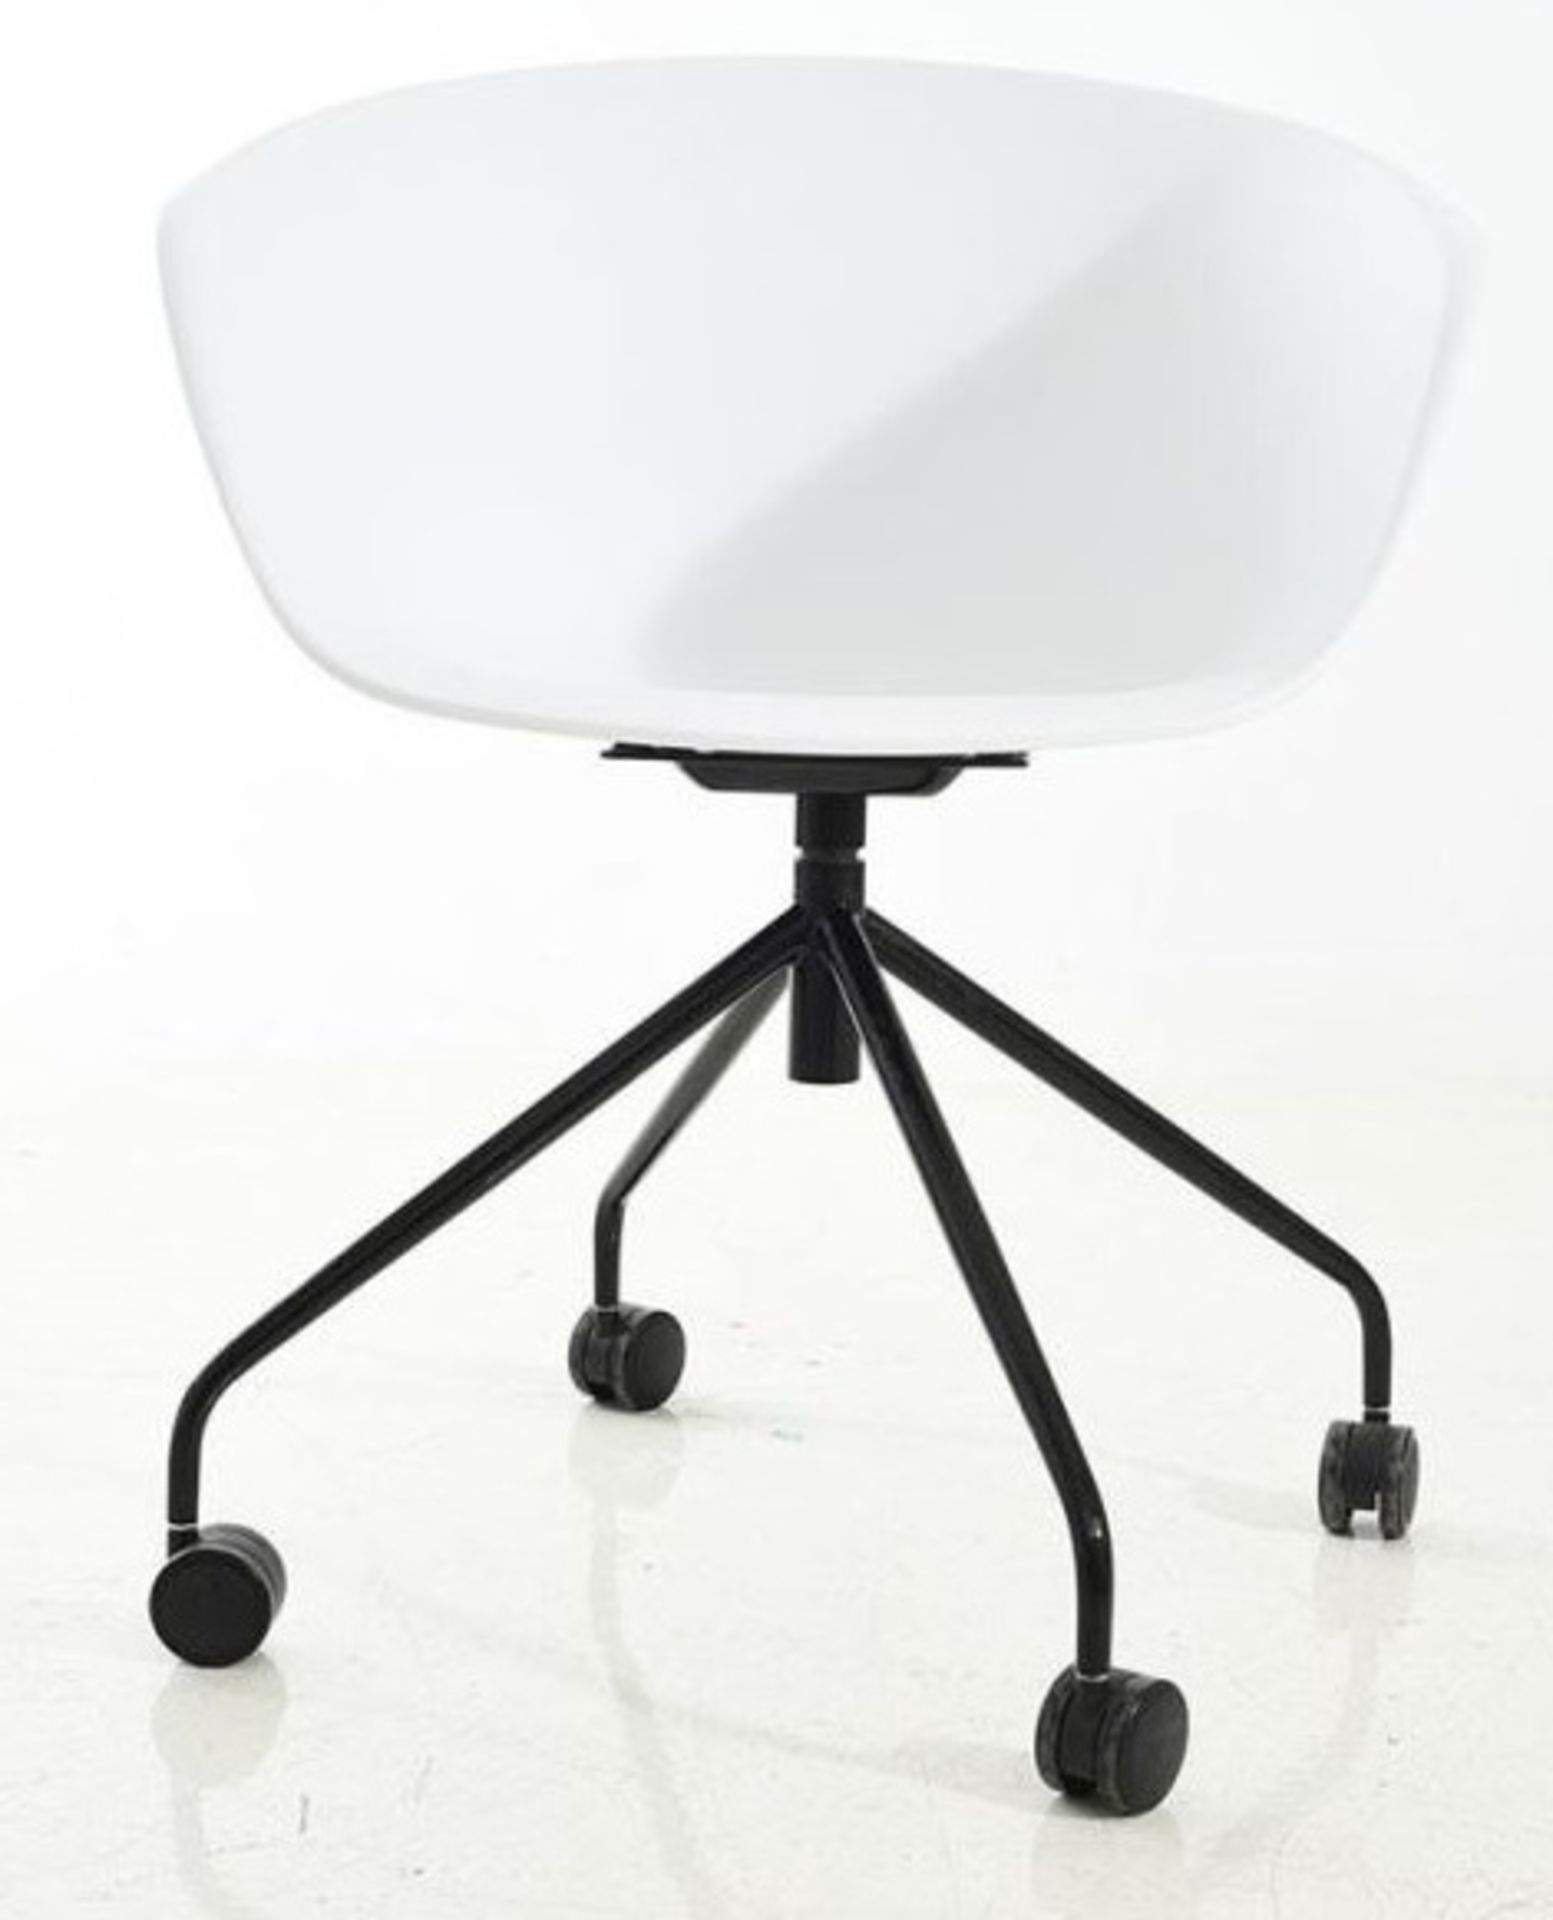 2 x Exquisitely Designed Office Swivel Chairs On Castors - Color: White Seat / Black Base - WH3 - - Image 2 of 4